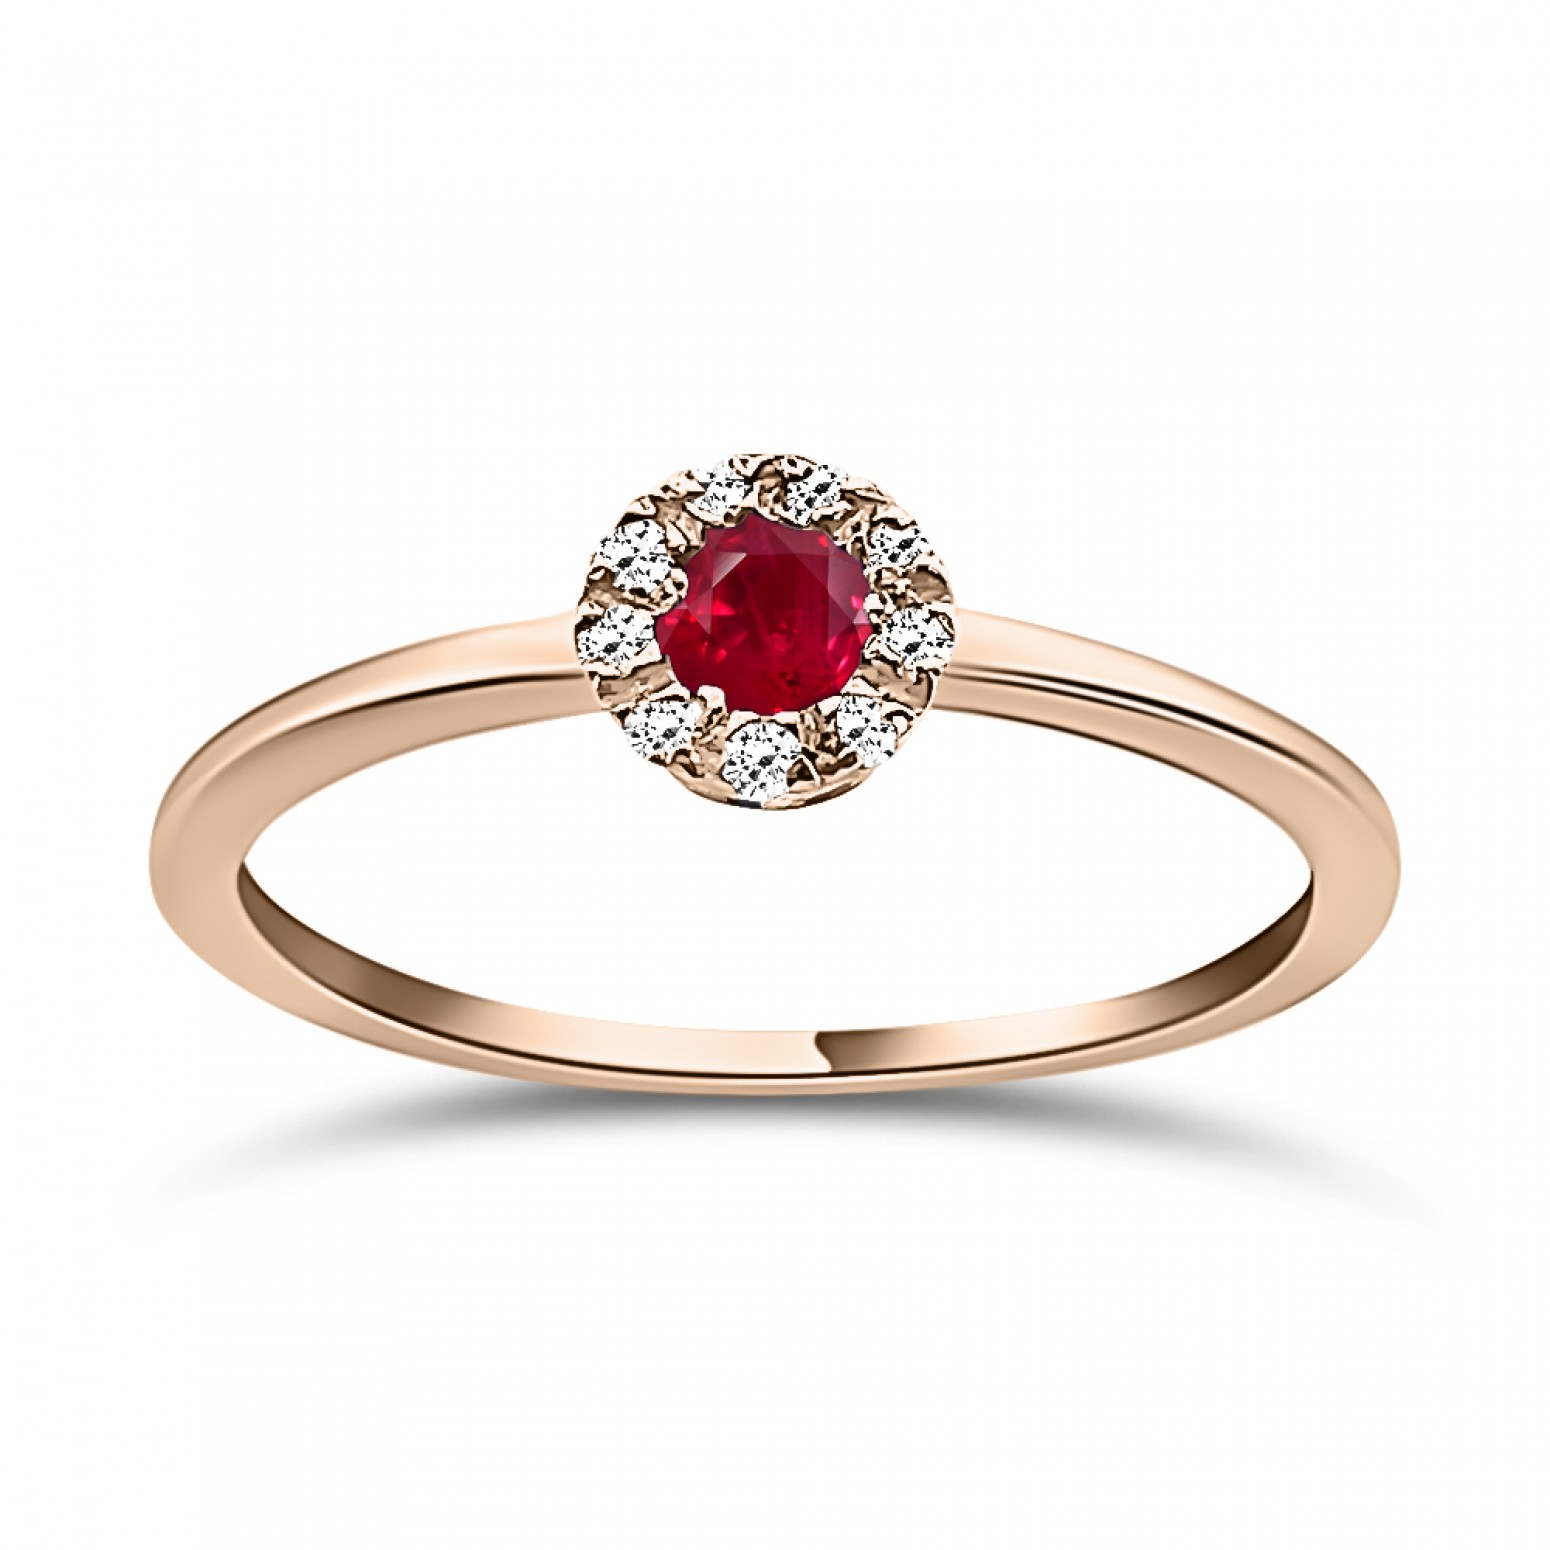 Solitaire ring 18K pink gold with ruby 0.15ct and diamonds SI1, H, da4093 ENGAGEMENT RINGS Κοσμηματα - chrilia.gr